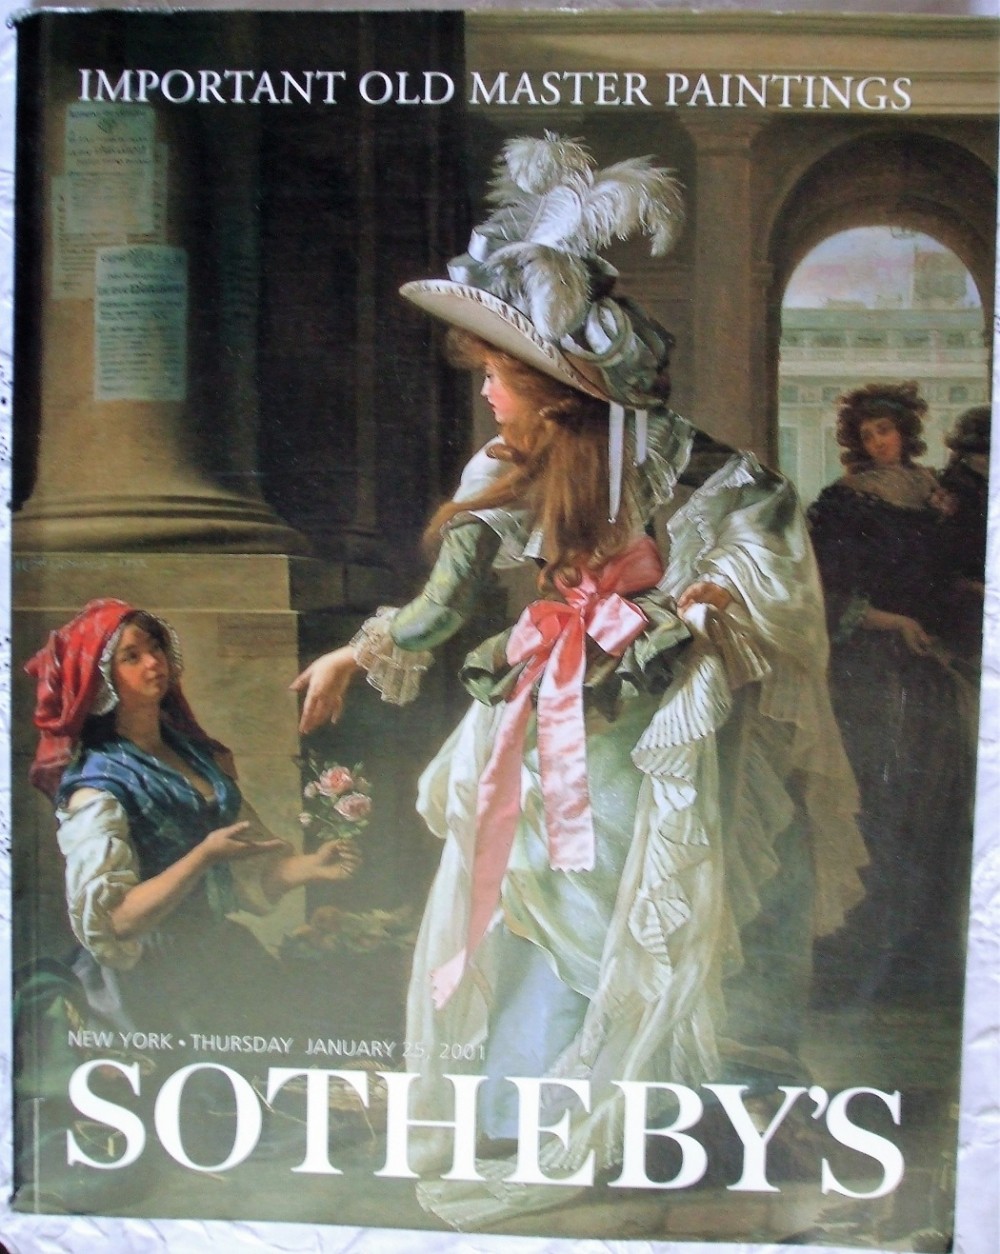 sotheby's important old master paintings new york 25 01 2001